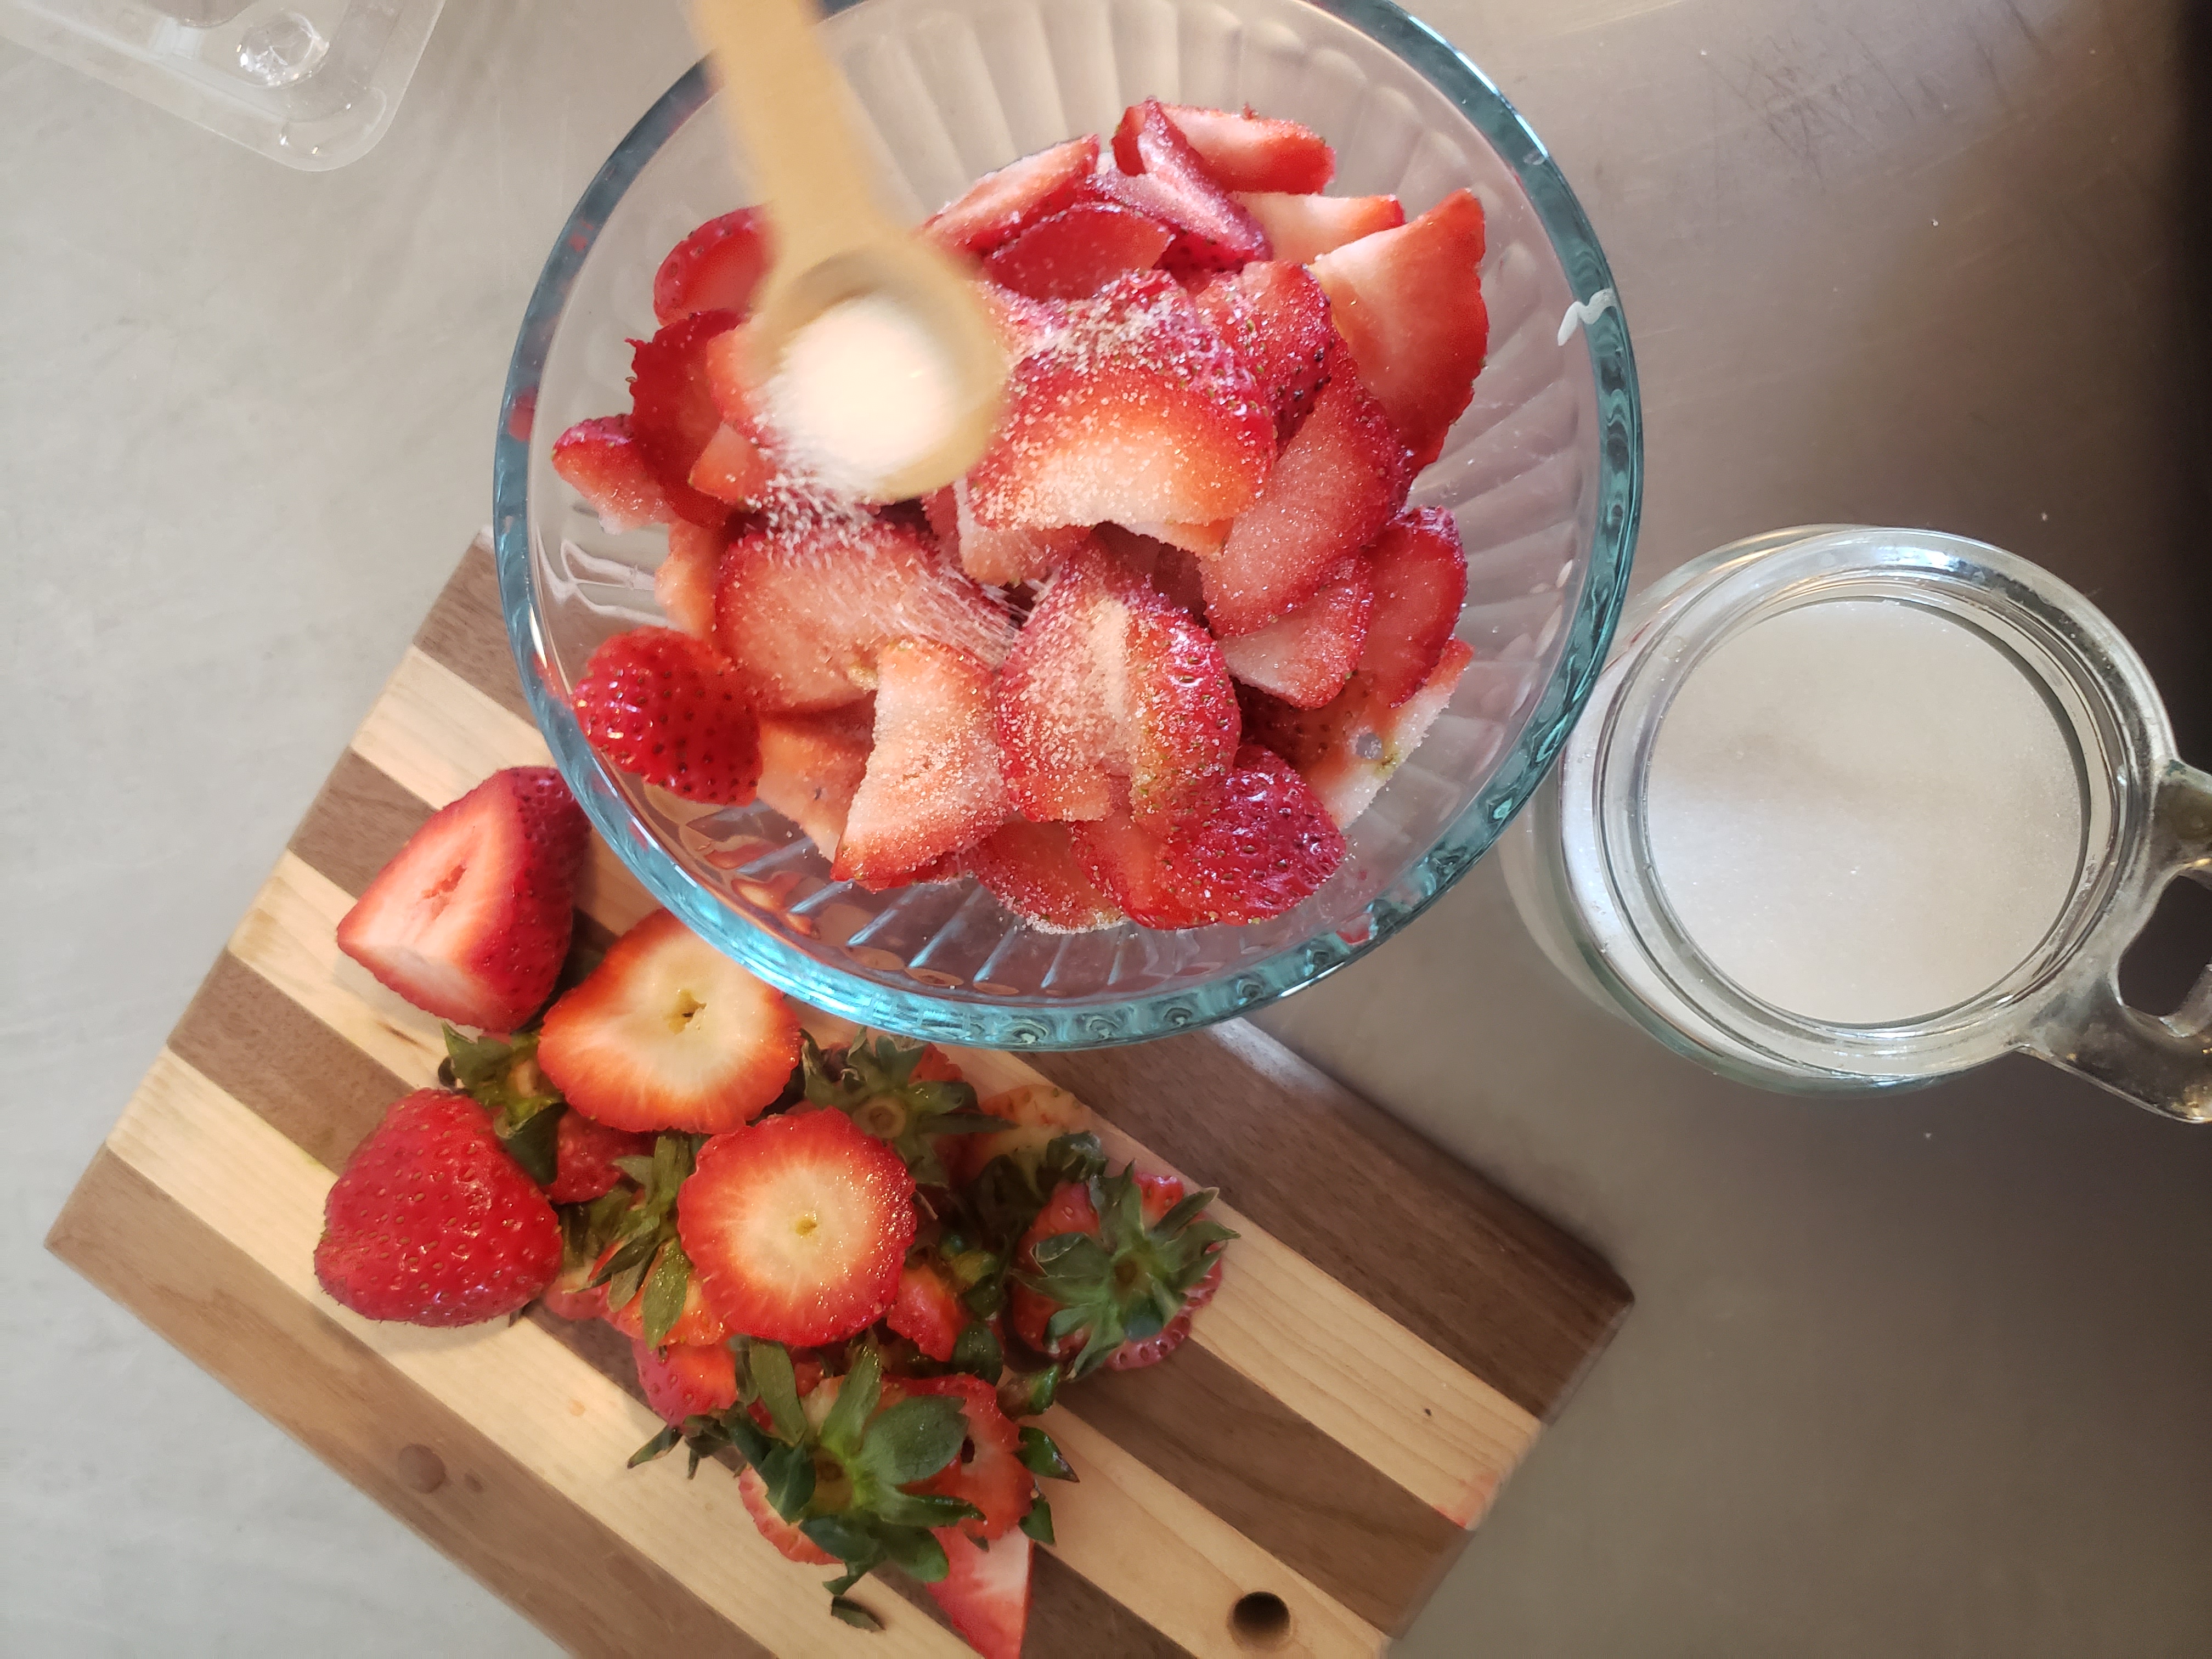 Sugar being added to sliced strawberries